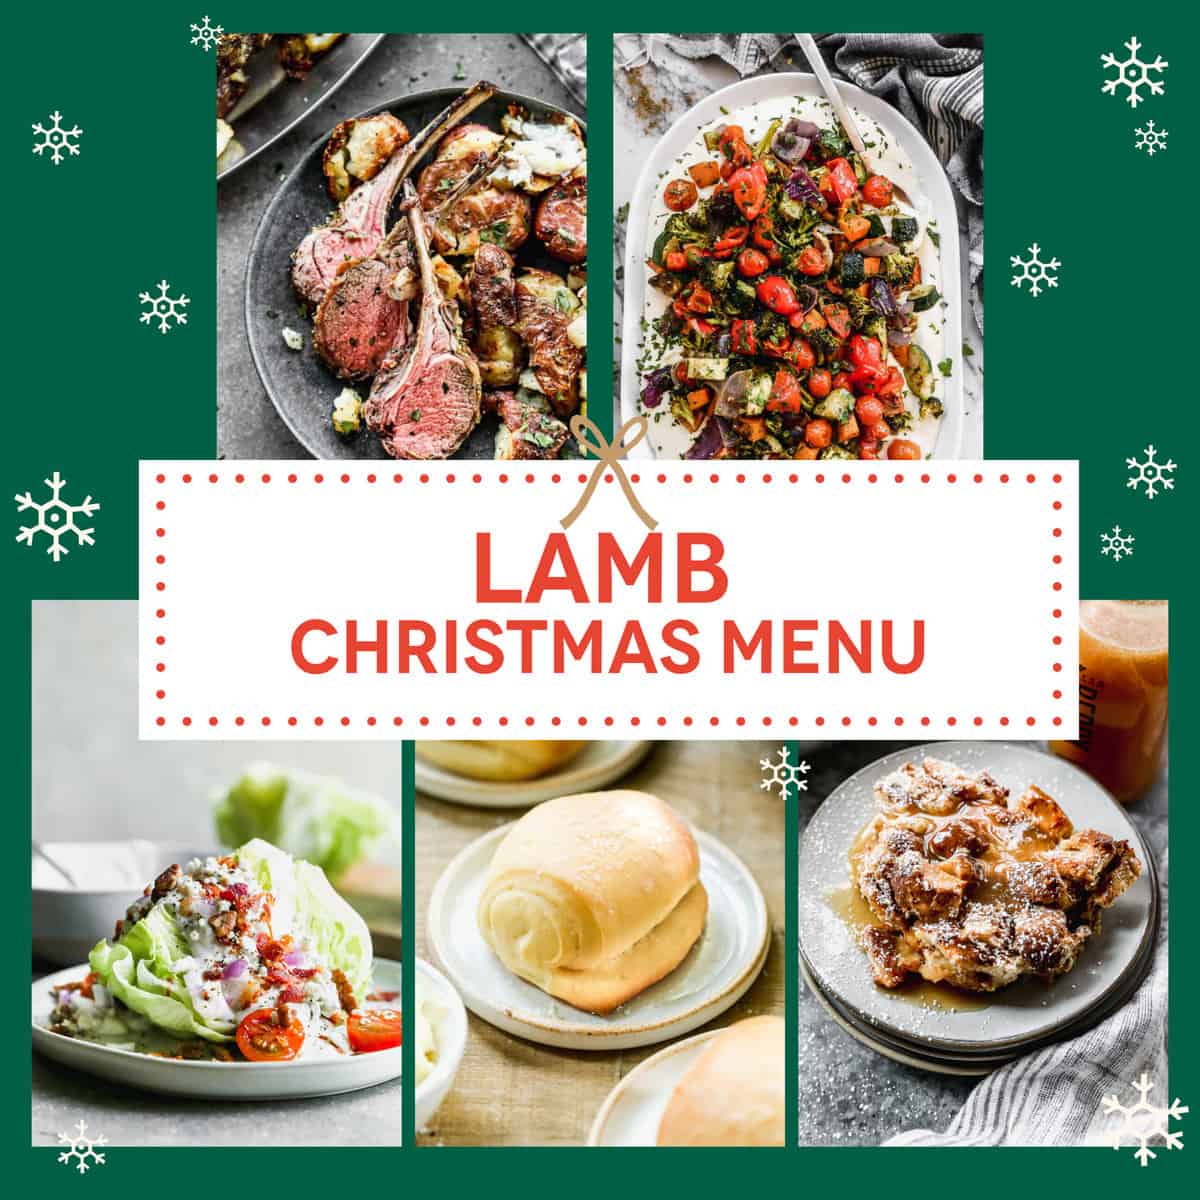 A graphic showing images to have the perfect Christmas Dinner with rack of lamb as the main dish.